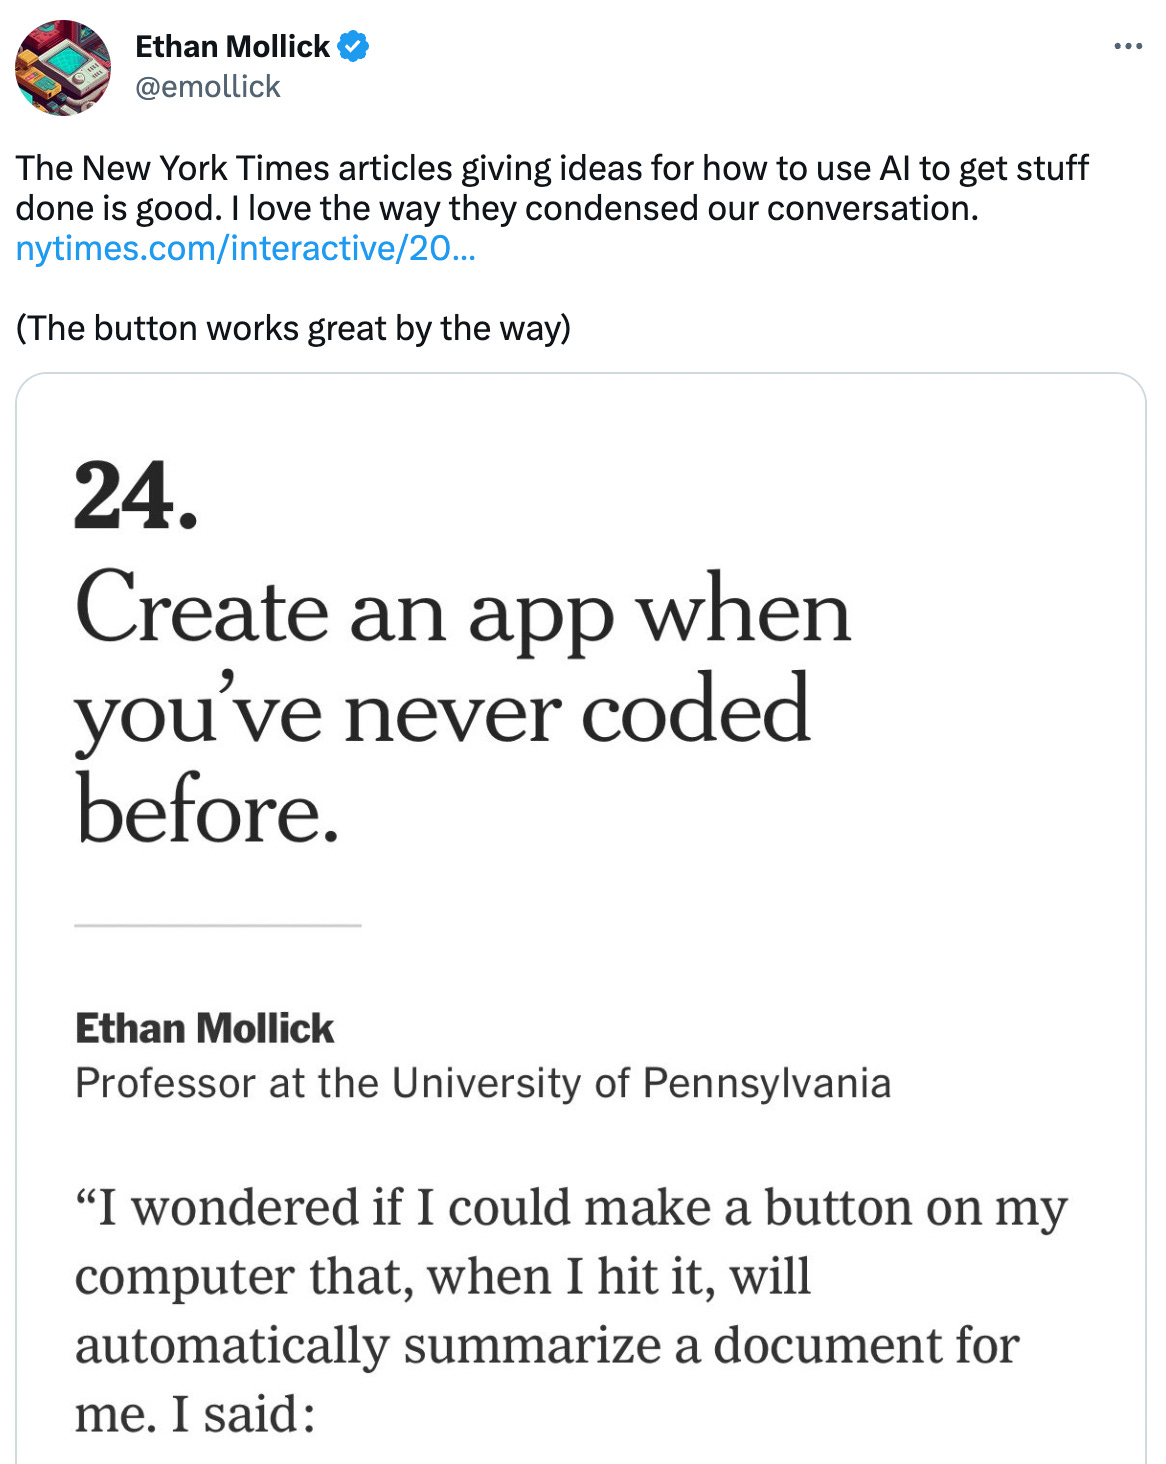  See new Tweets Conversation Ethan Mollick @emollick The New York Times articles giving ideas for how to use AI to get stuff done is good. I love the way they condensed our conversation. https://nytimes.com/interactive/2023/04/14/upshot/up-ai-uses.html  (The button works great by the way)